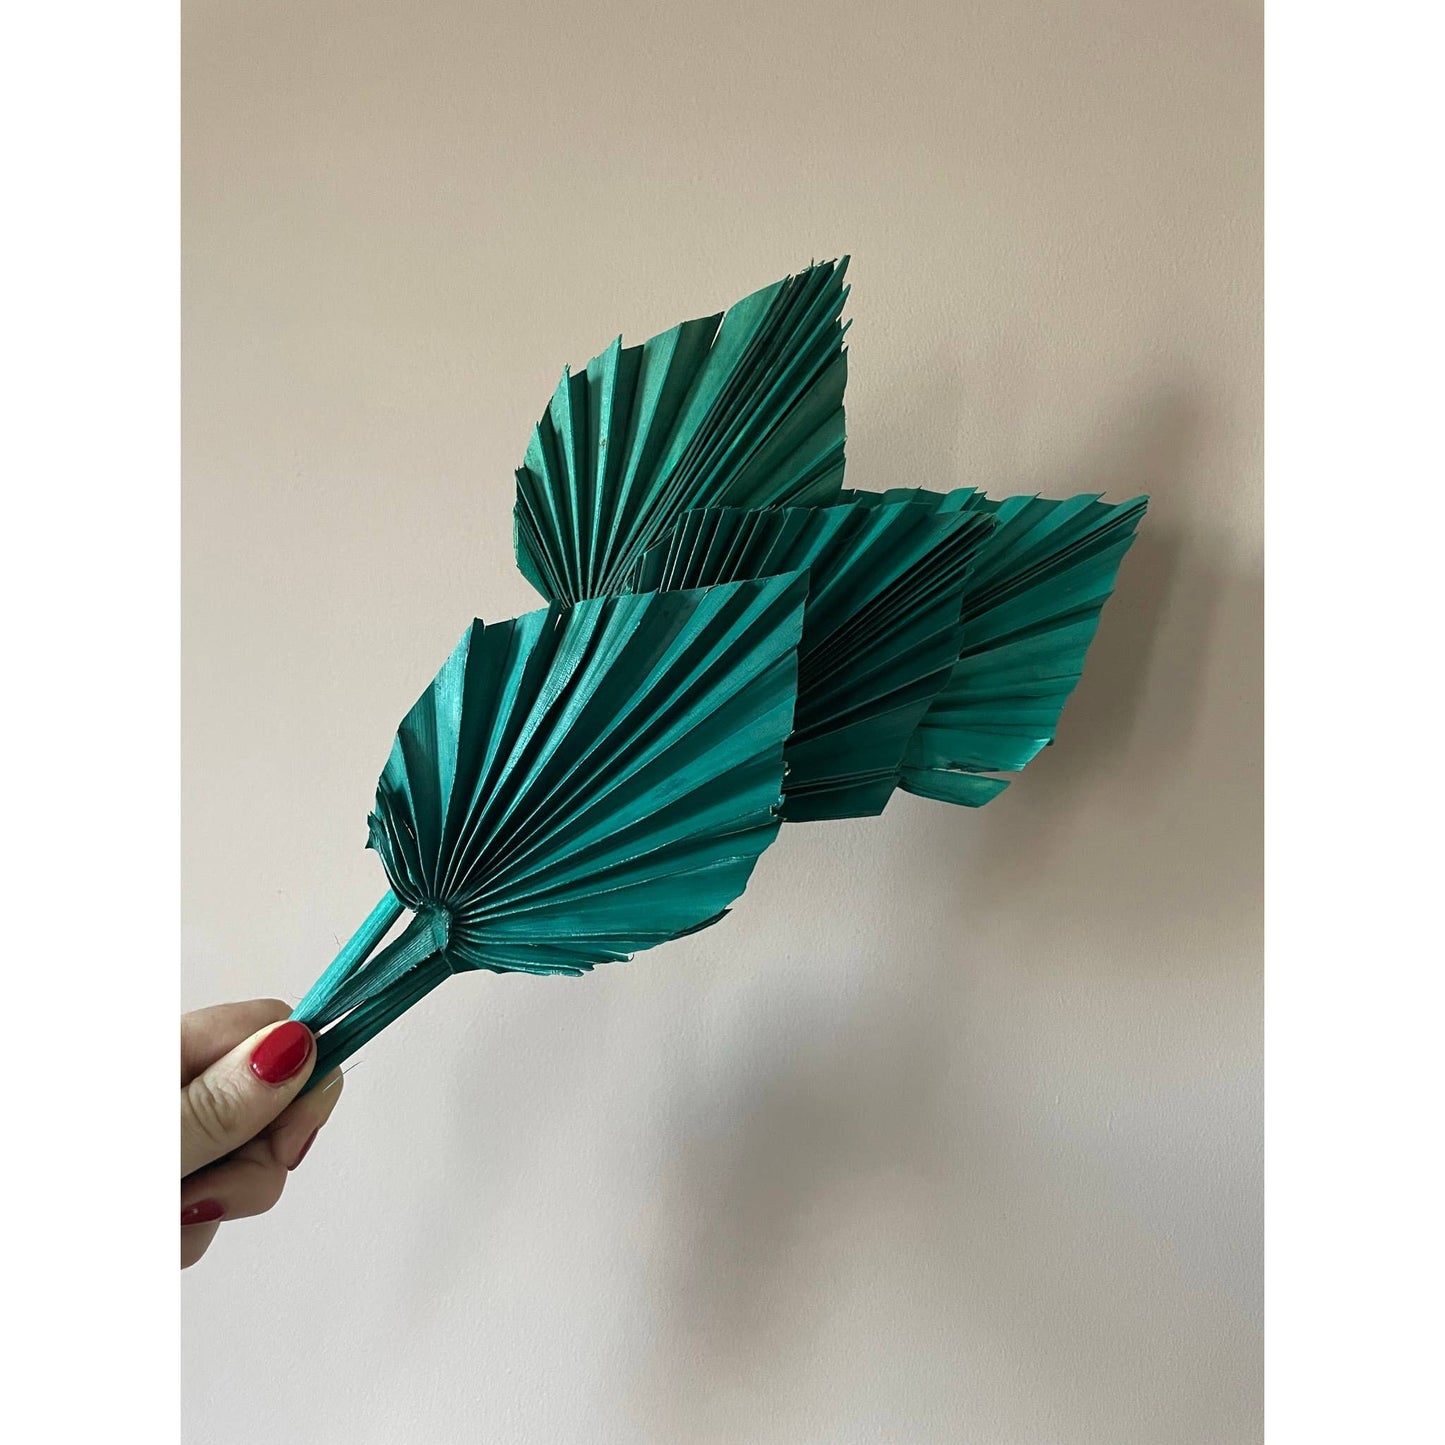 Pavot blue interiors - Natural dried deep green palm spear - Curated Home Decor